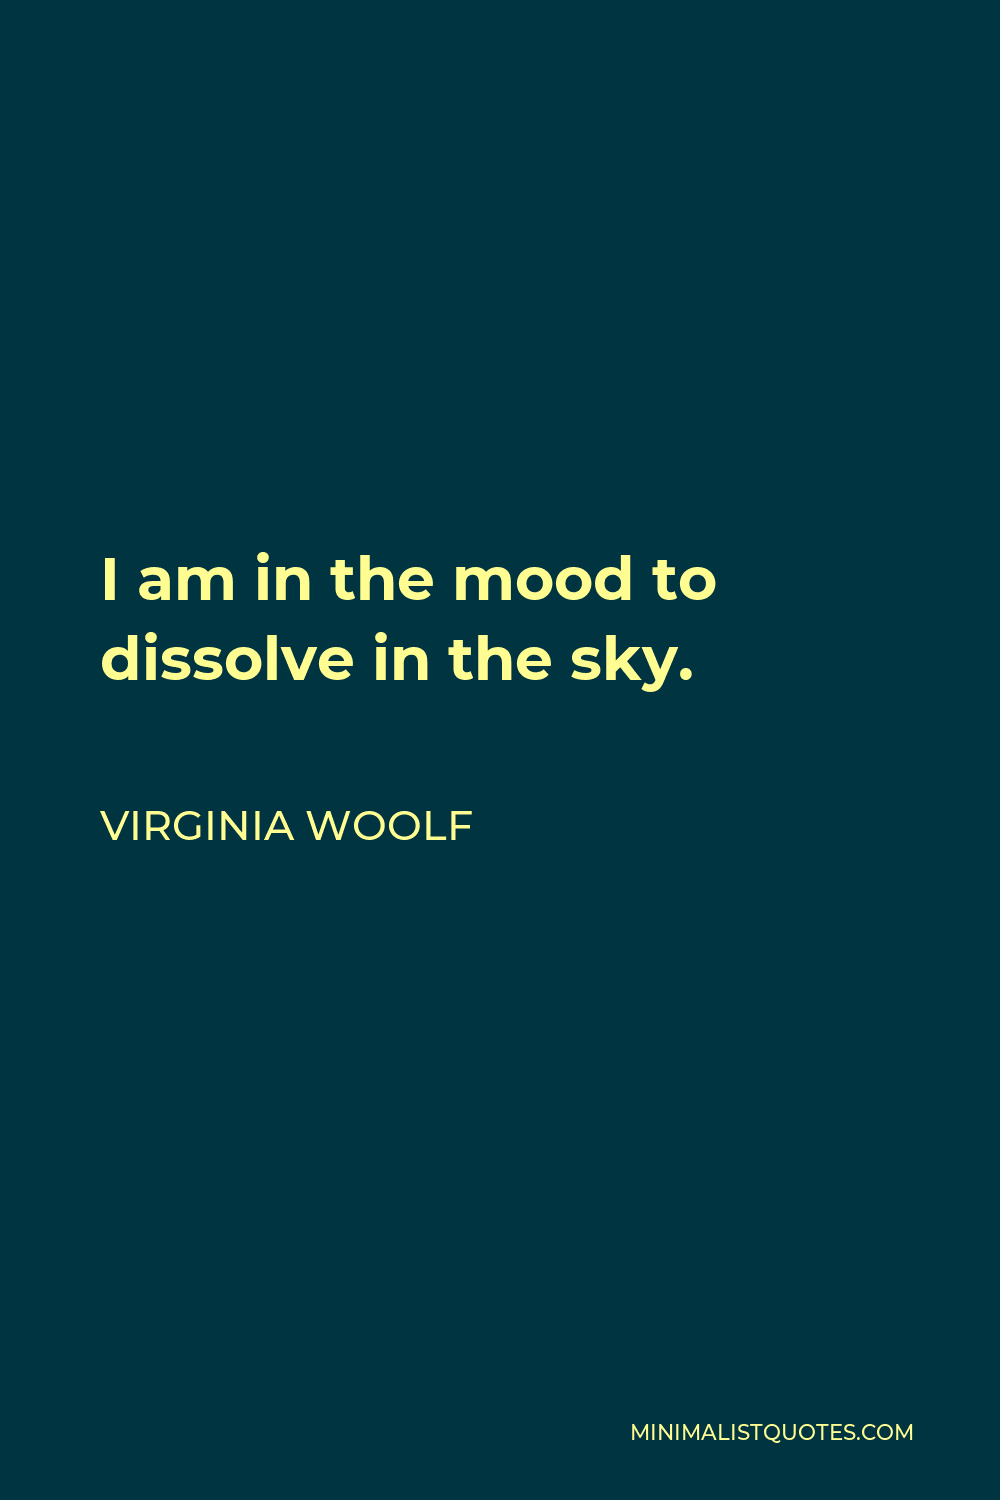 Virginia Woolf Quote - I am in the mood to dissolve in the sky.